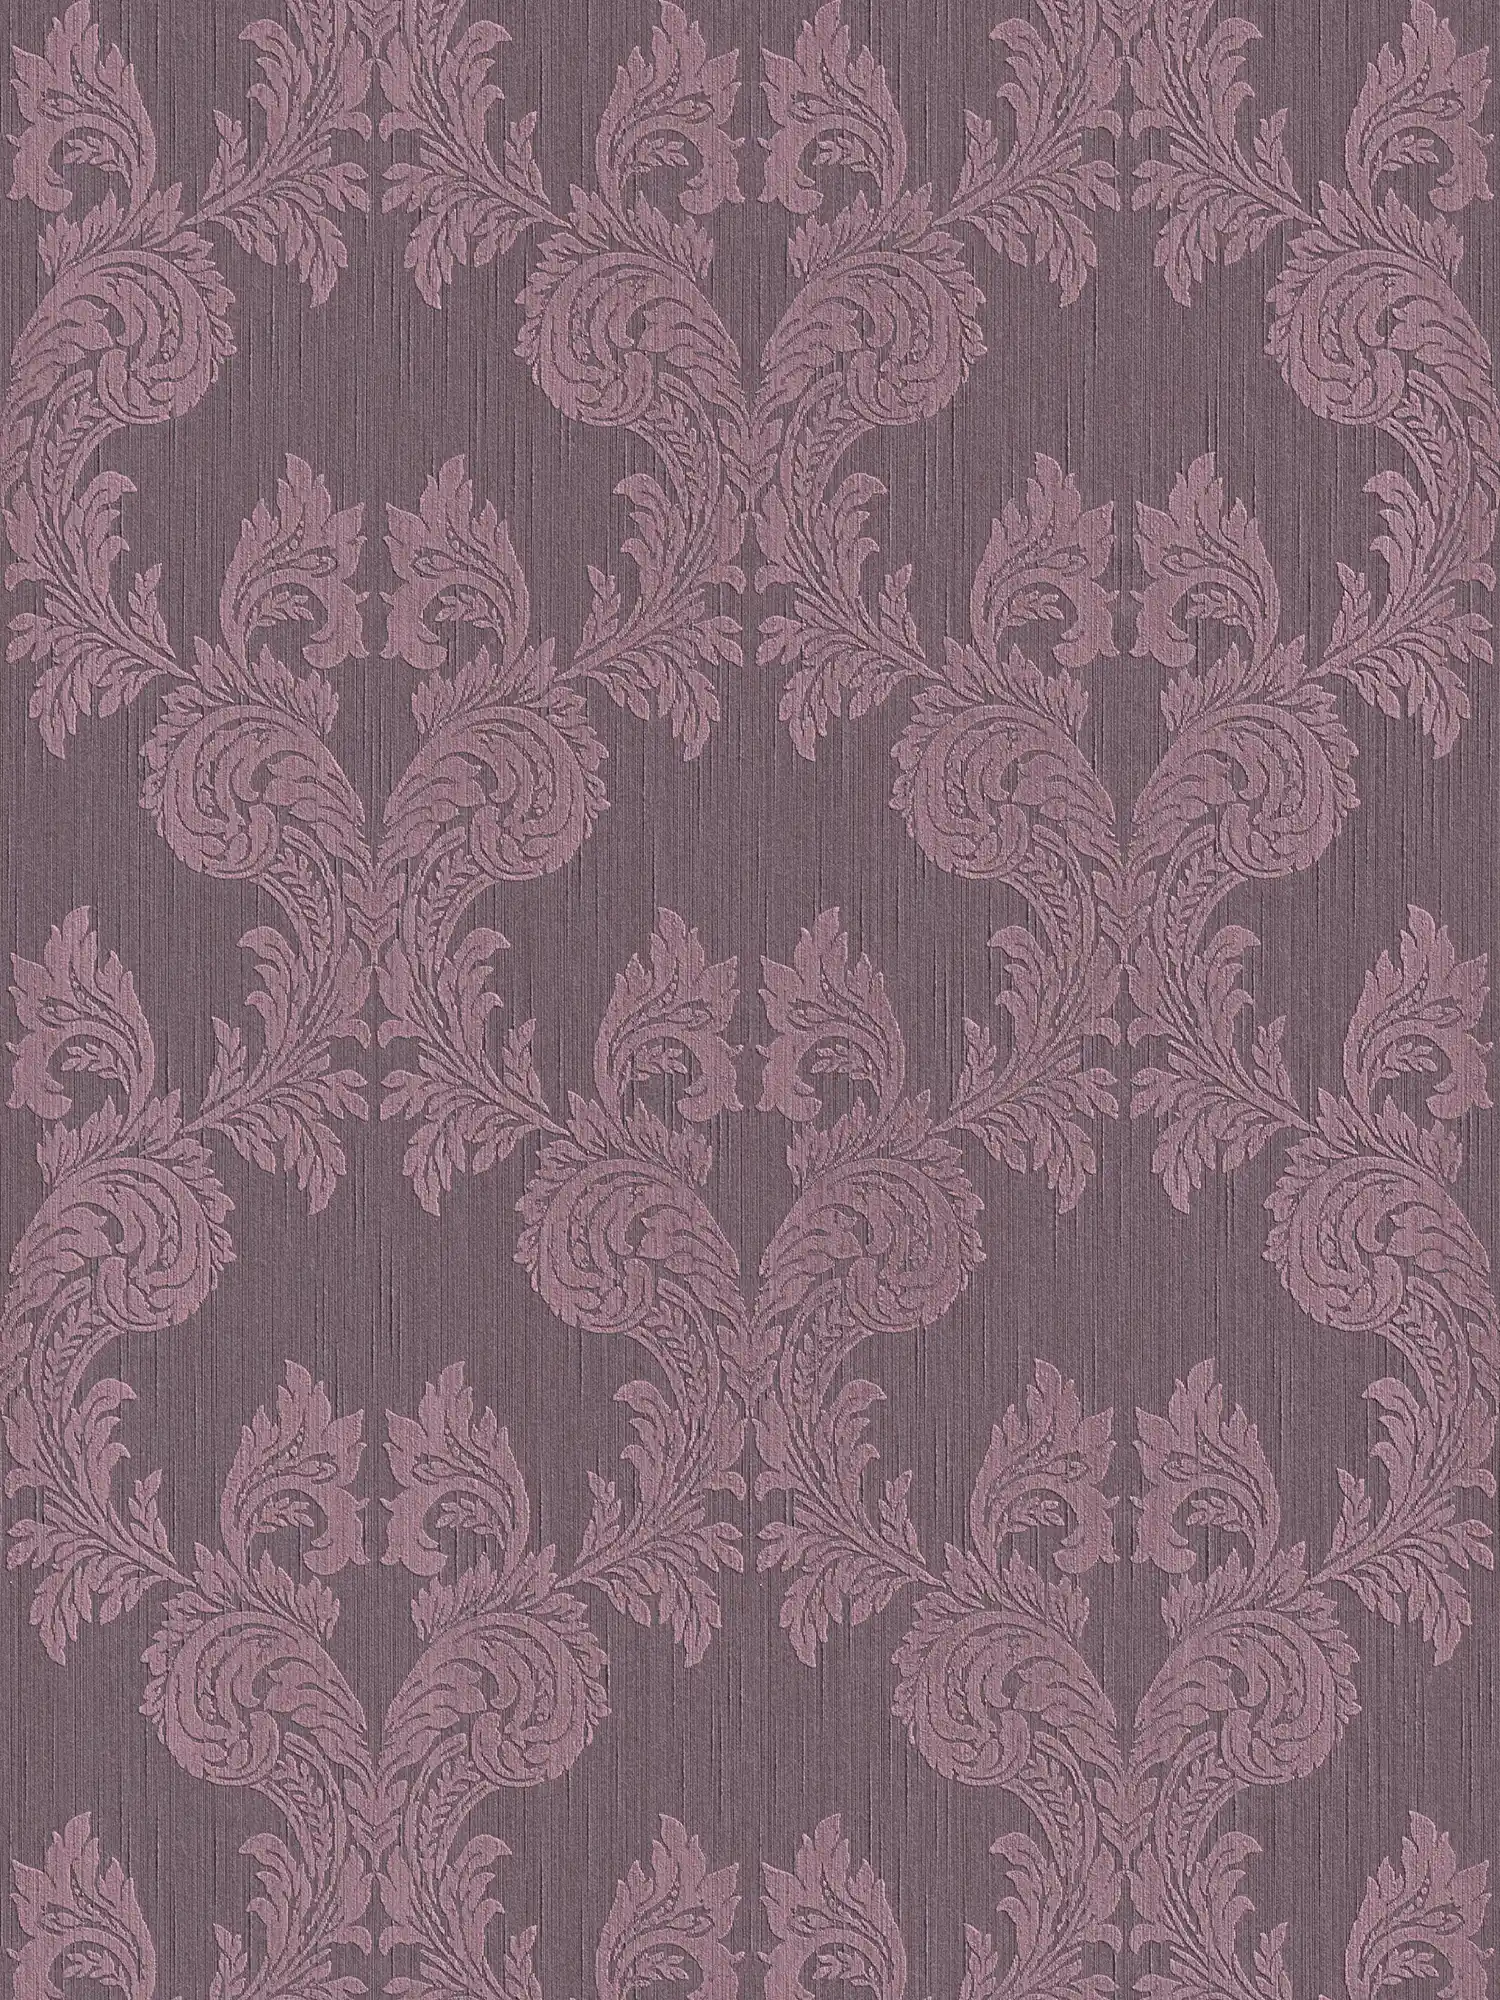 Wallpaper with floral ornament pattern & texture effect - purple
